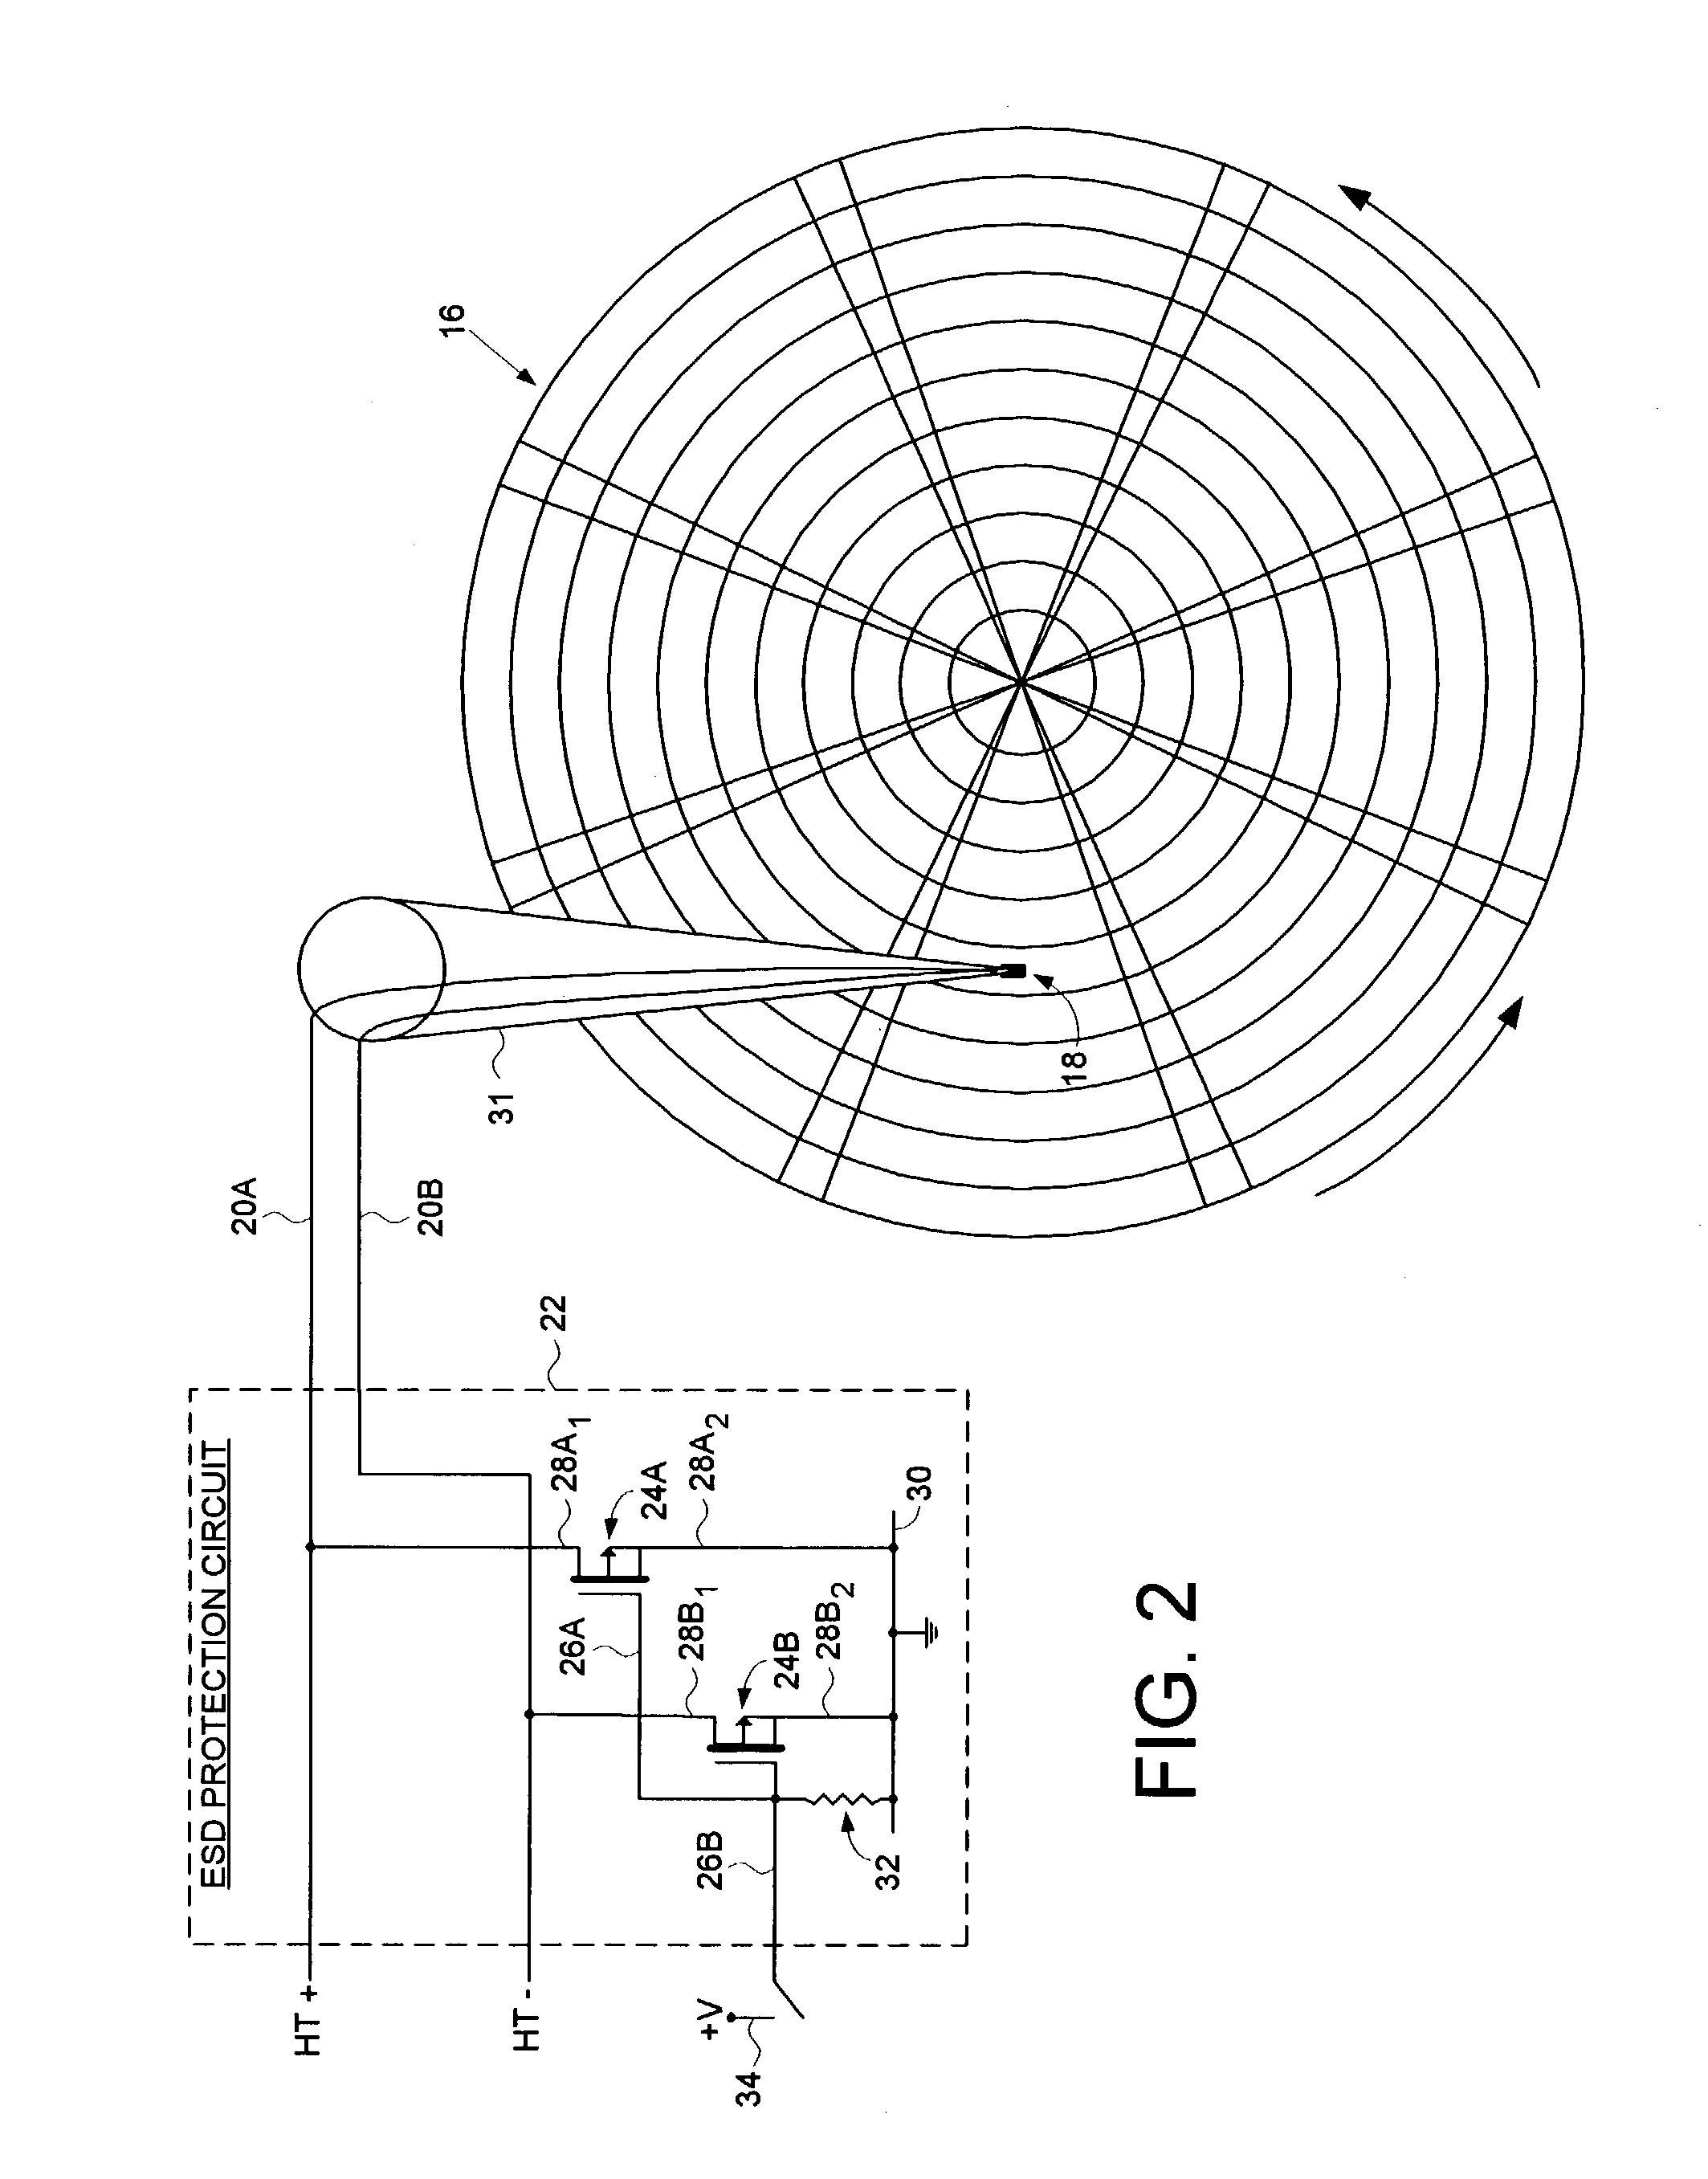 Disk drive comprising depletion mode MOSFETs for protecting a head from electrostatic discharge